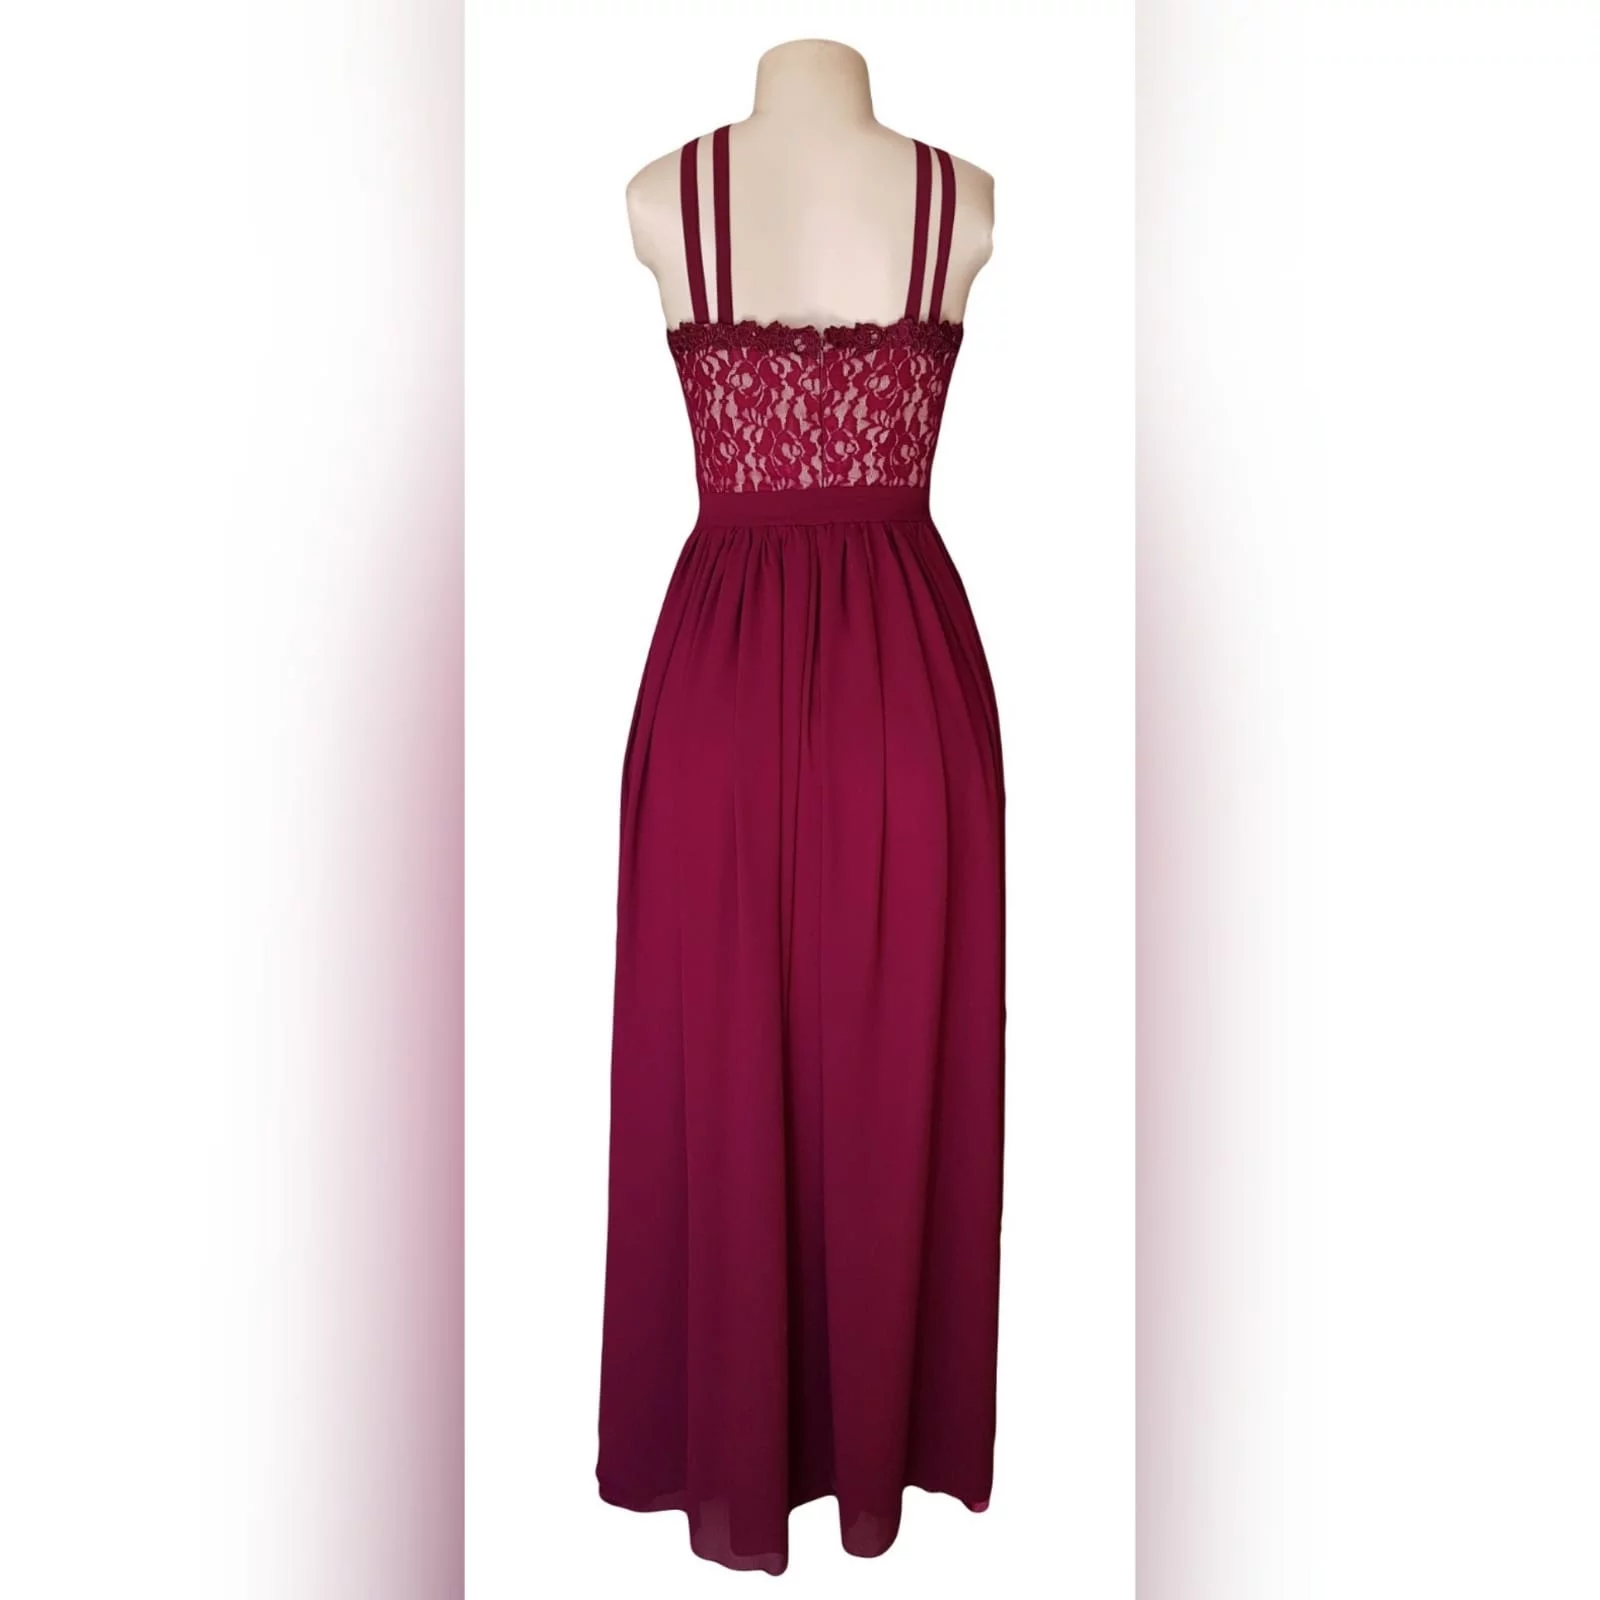 Versatile 2 piece maroon dress 4 <blockquote>to shine your brightest light is to be who you truly are. Roy t. Bennett</blockquote> a versatile 2 piece maroon dress. A lace short leg bodysuit with a sweetheart neckline and shoulder straps. With a removable flowy chiffon skirt with a slit.